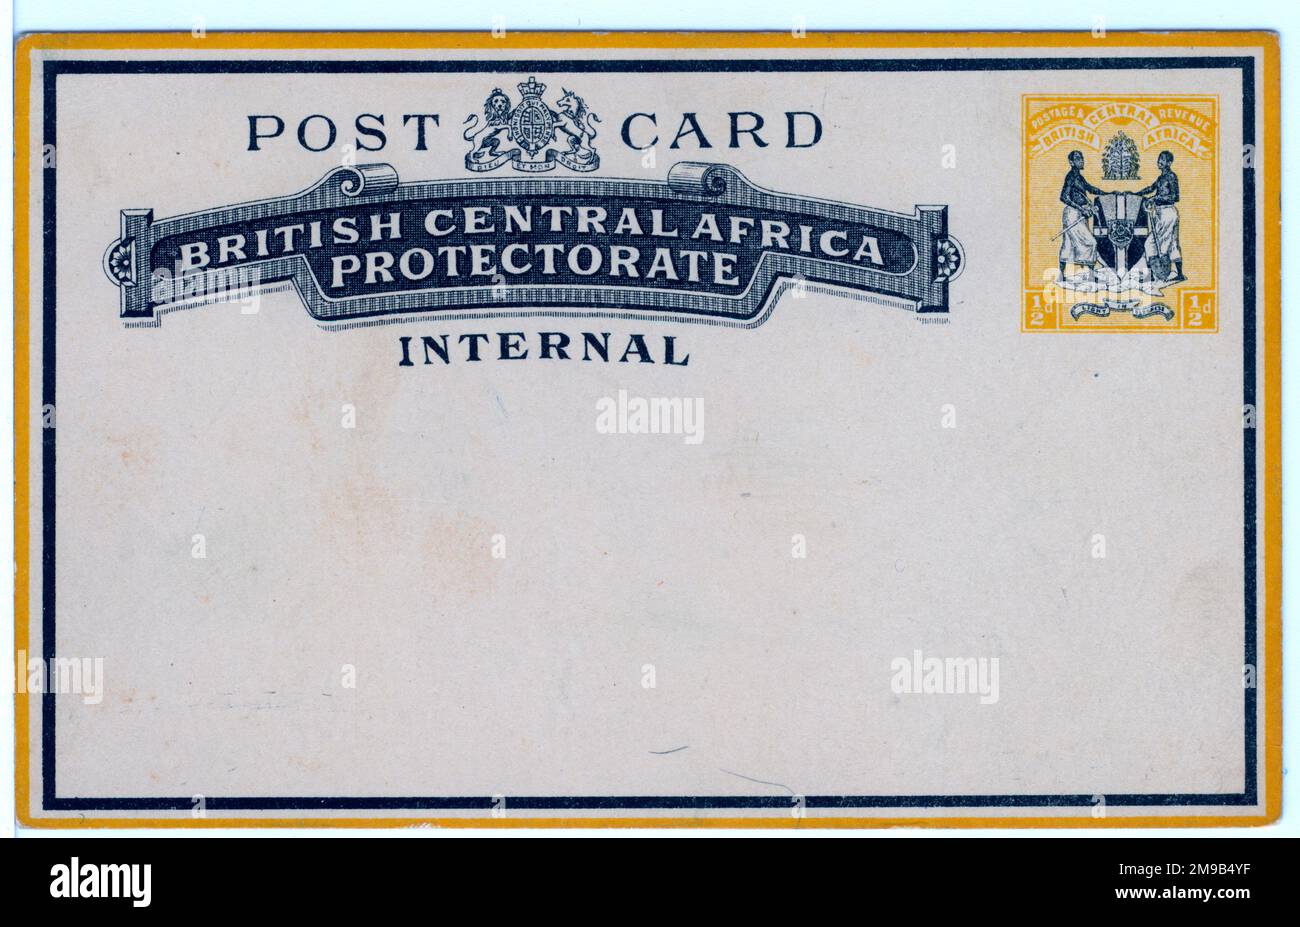 The Protectorate was established in 1889. The card is black and yellow printing on buff board with a printed half-penny stamp of two native figures. Stock Photo